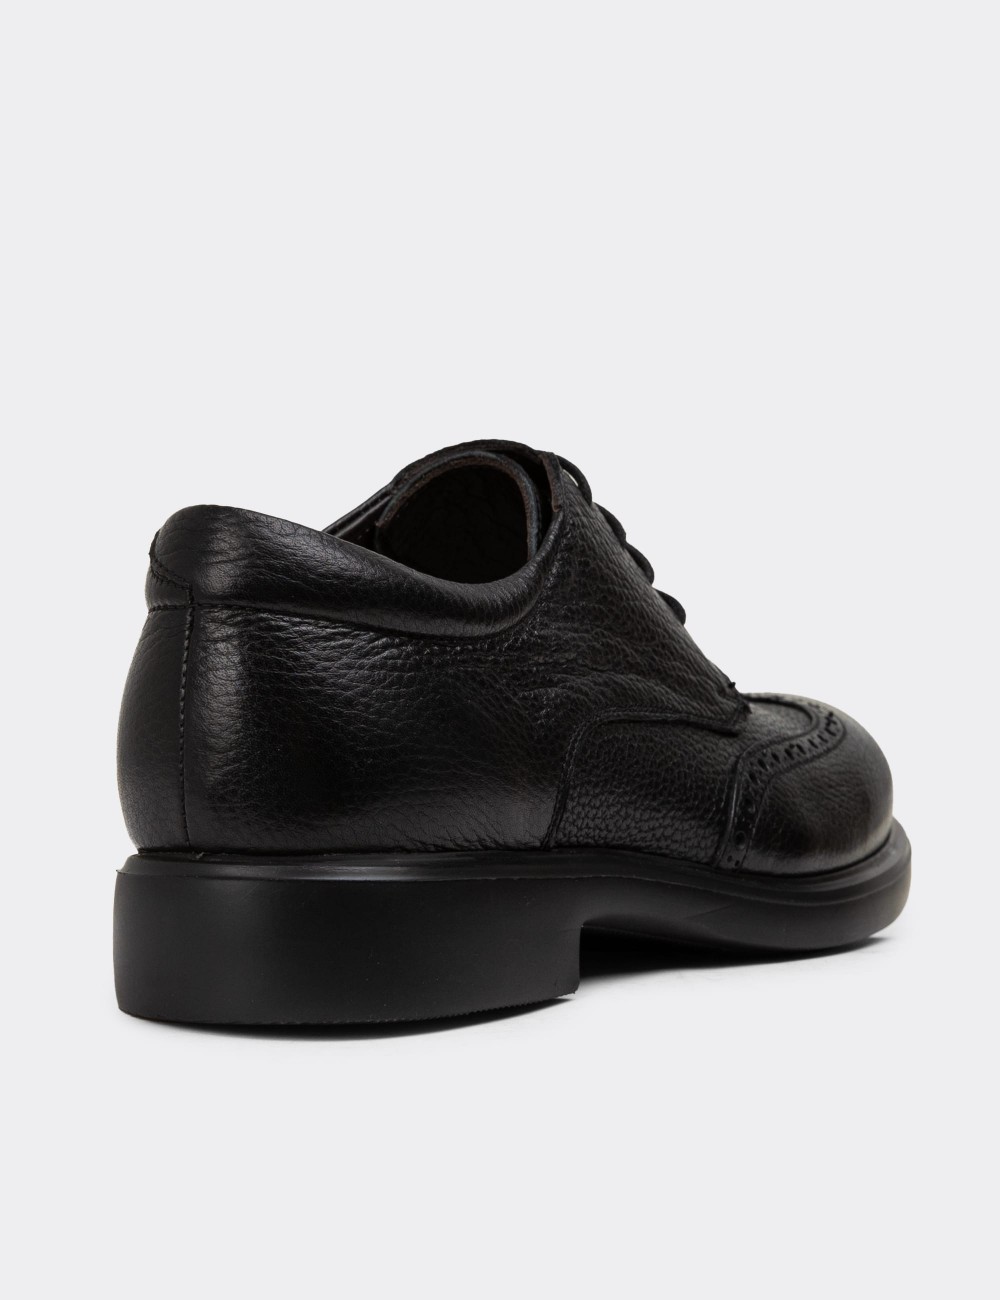 Black Leather Lace-up Shoes - 01942MSYHE03